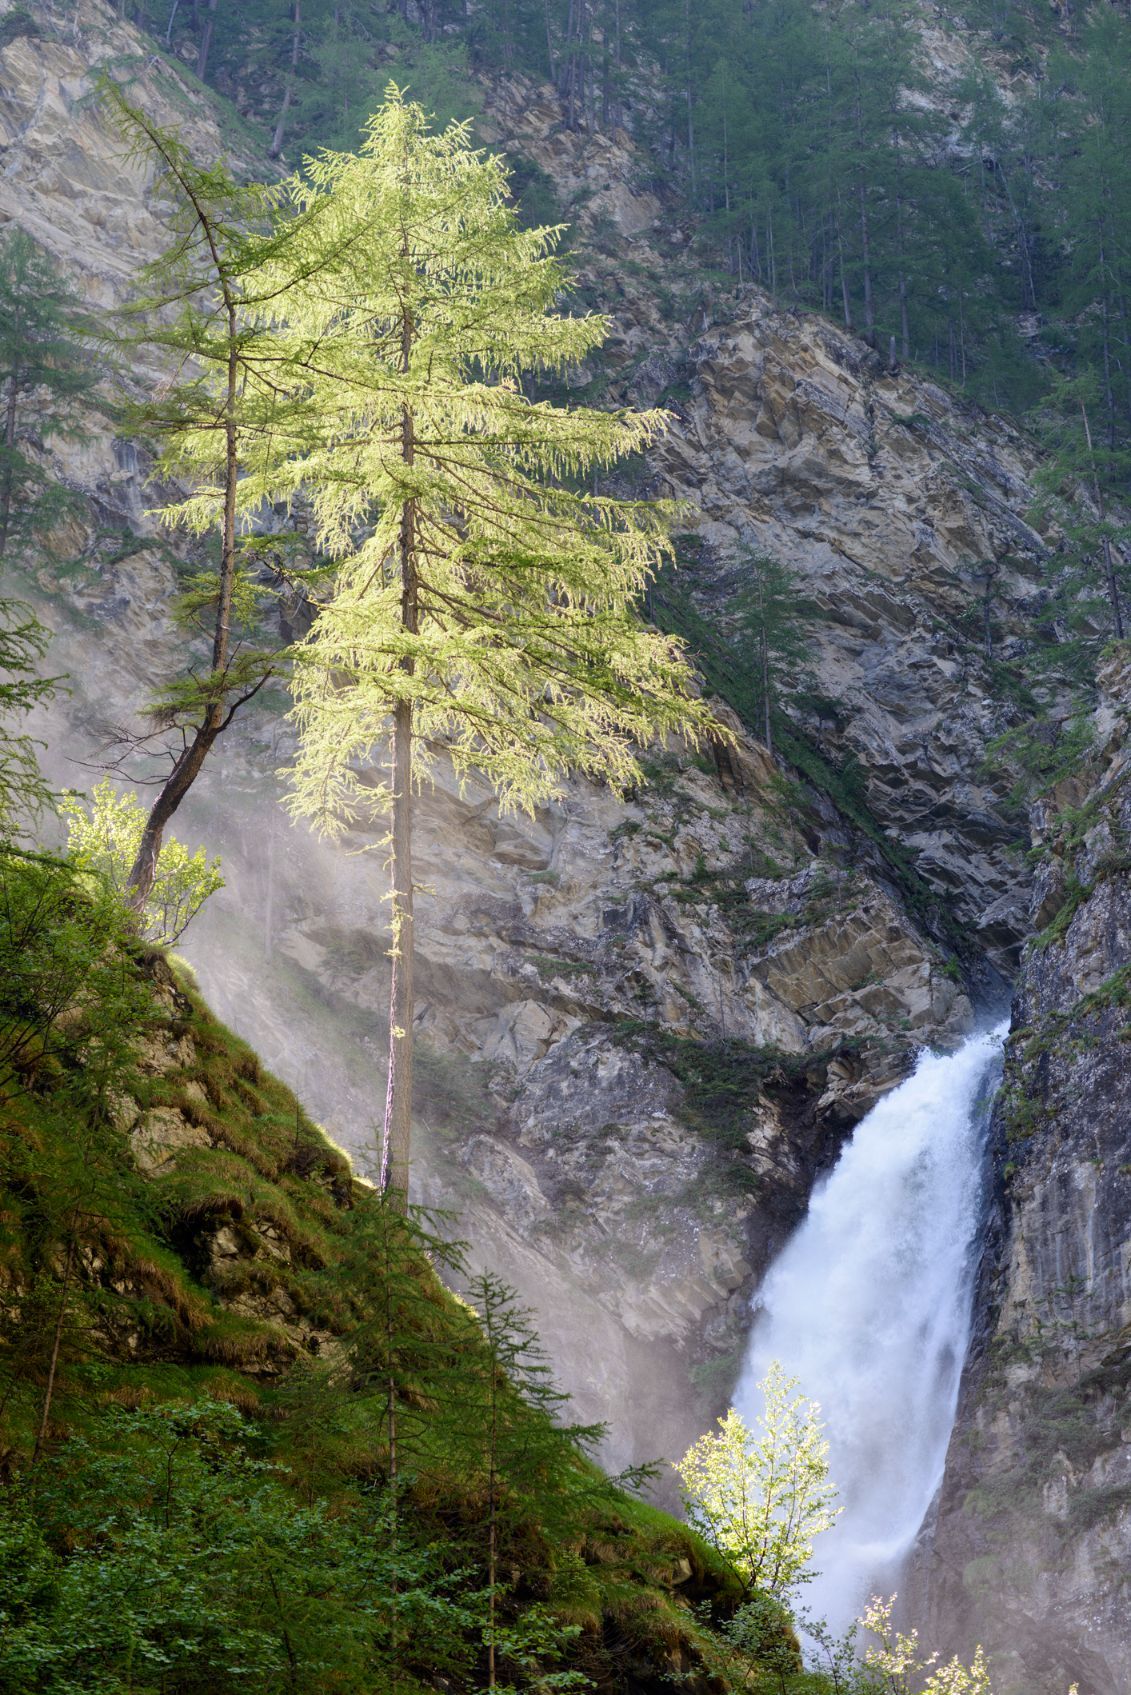 The Gössnitz waterfall in the Hohe Tauern national park in Austria. 